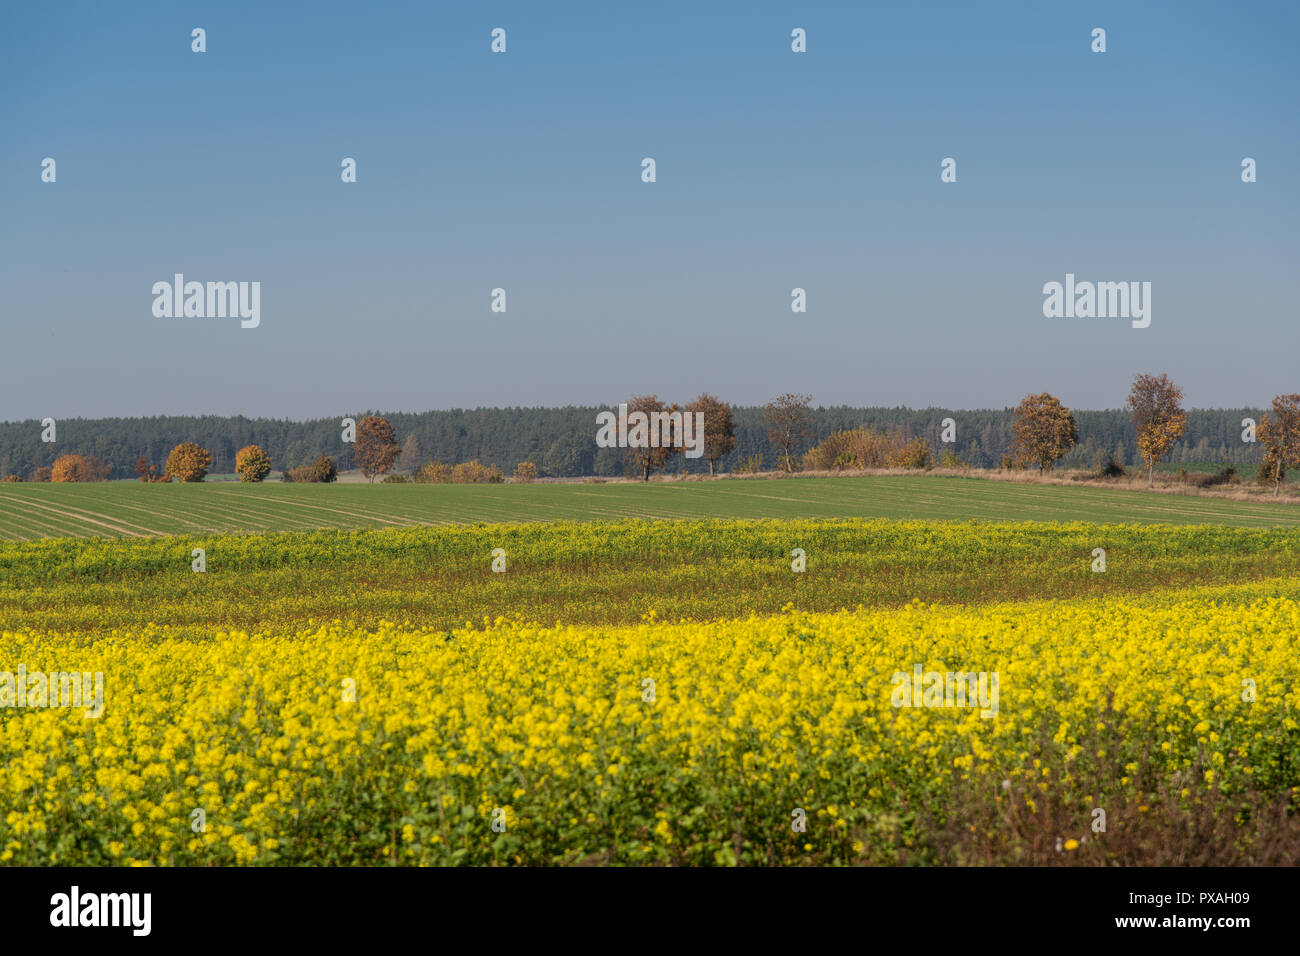 Landscape, end of the world, autumn, blooming buckwheat, farmland, view, autumn colors, yellow, green, gold Stock Photo